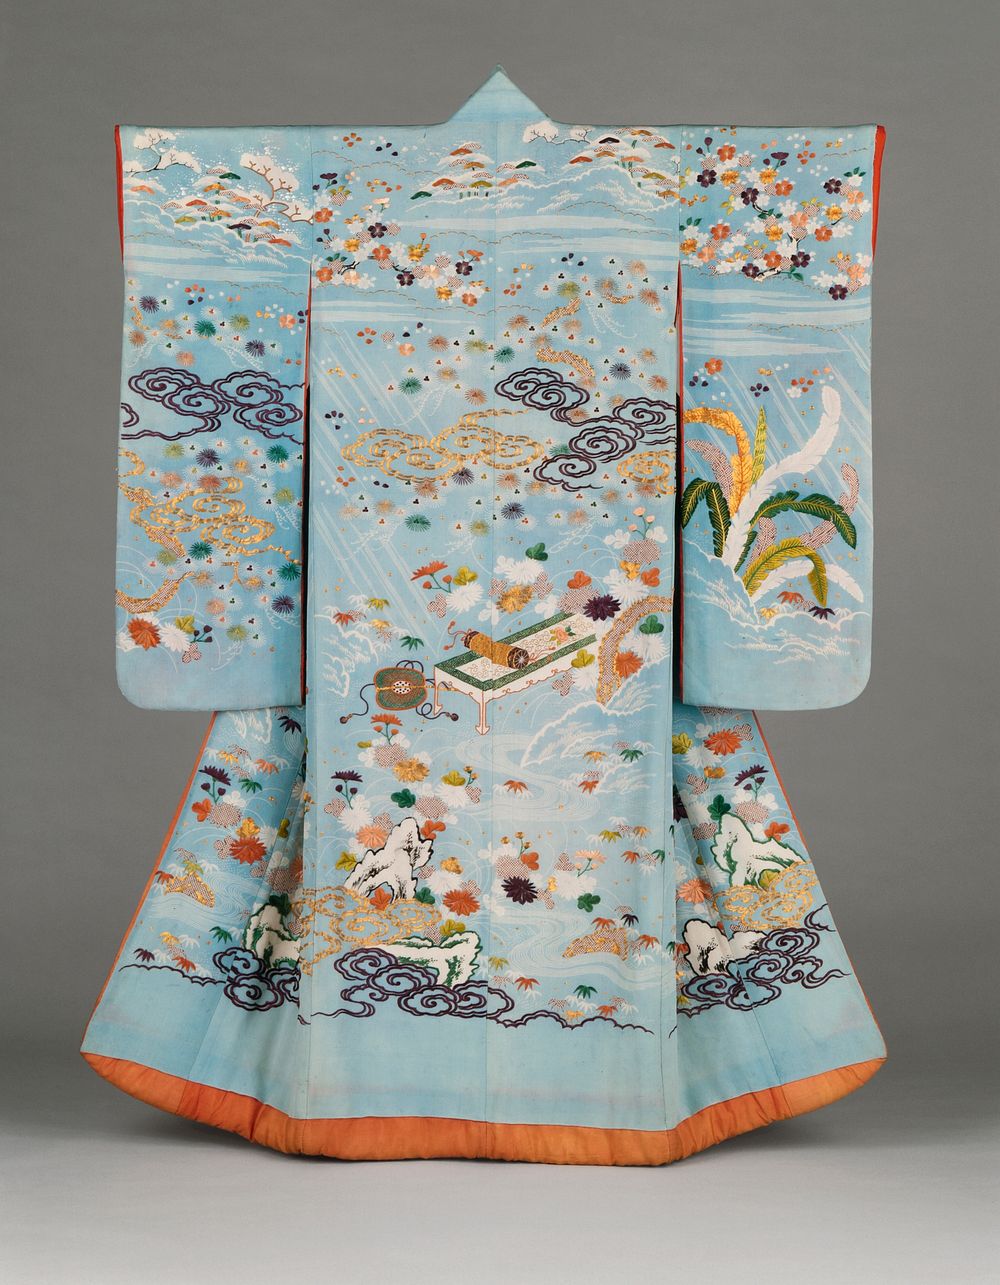 Woman's Kimono (Furisode) with Imagery Alluding to the Noh Play Kikujido